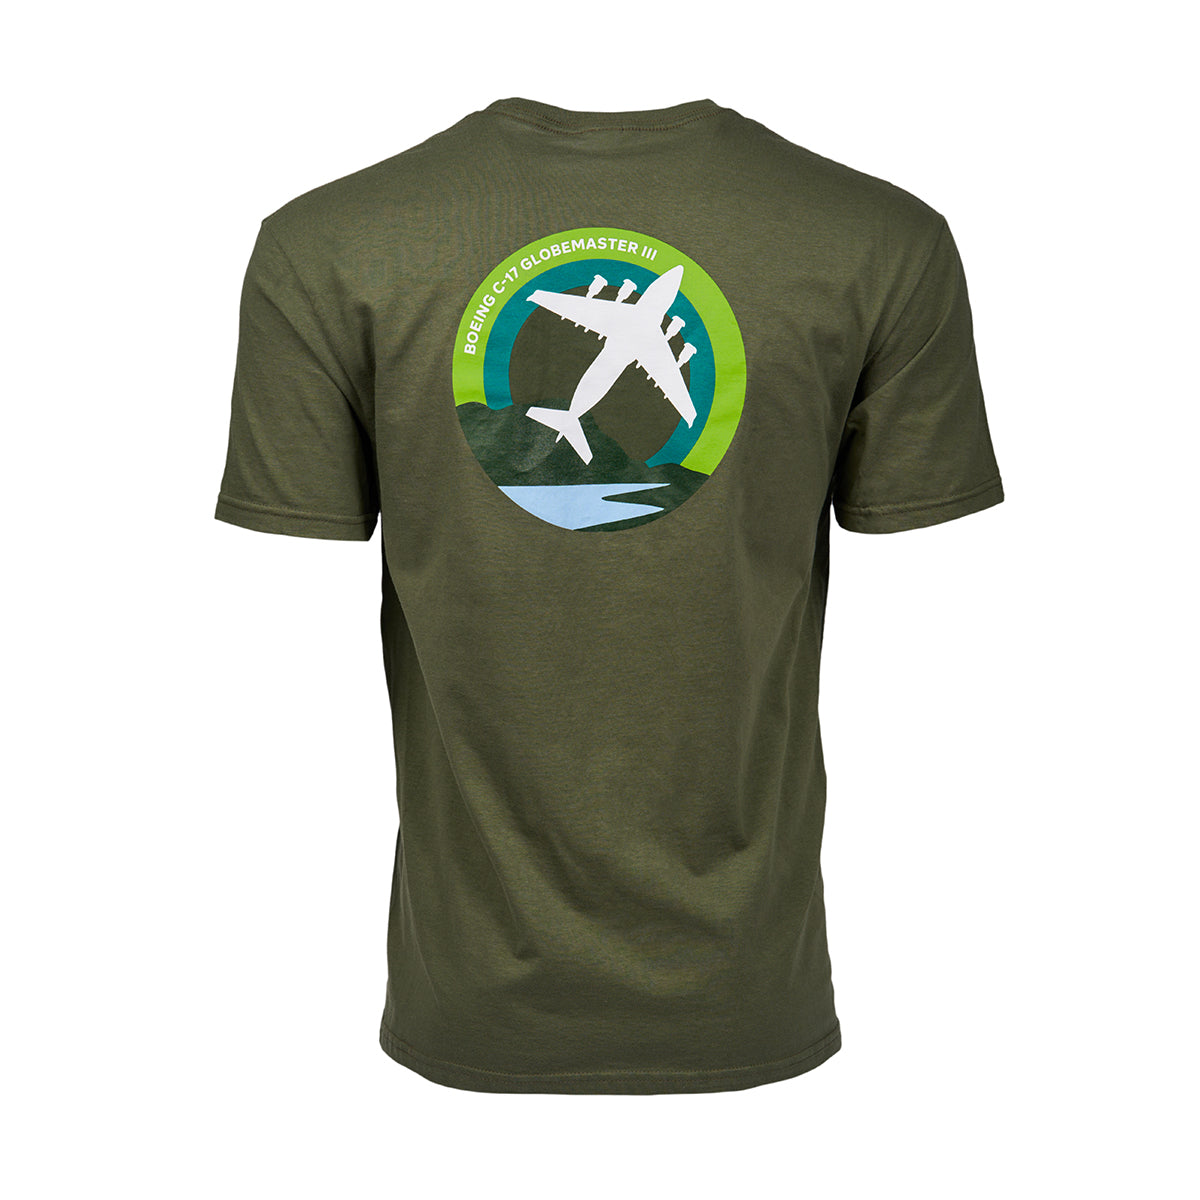 Full product image of the back side of the t-shirt in a green color.  Showing the Skyward graphic of the Boeing C-17 Globemaster.